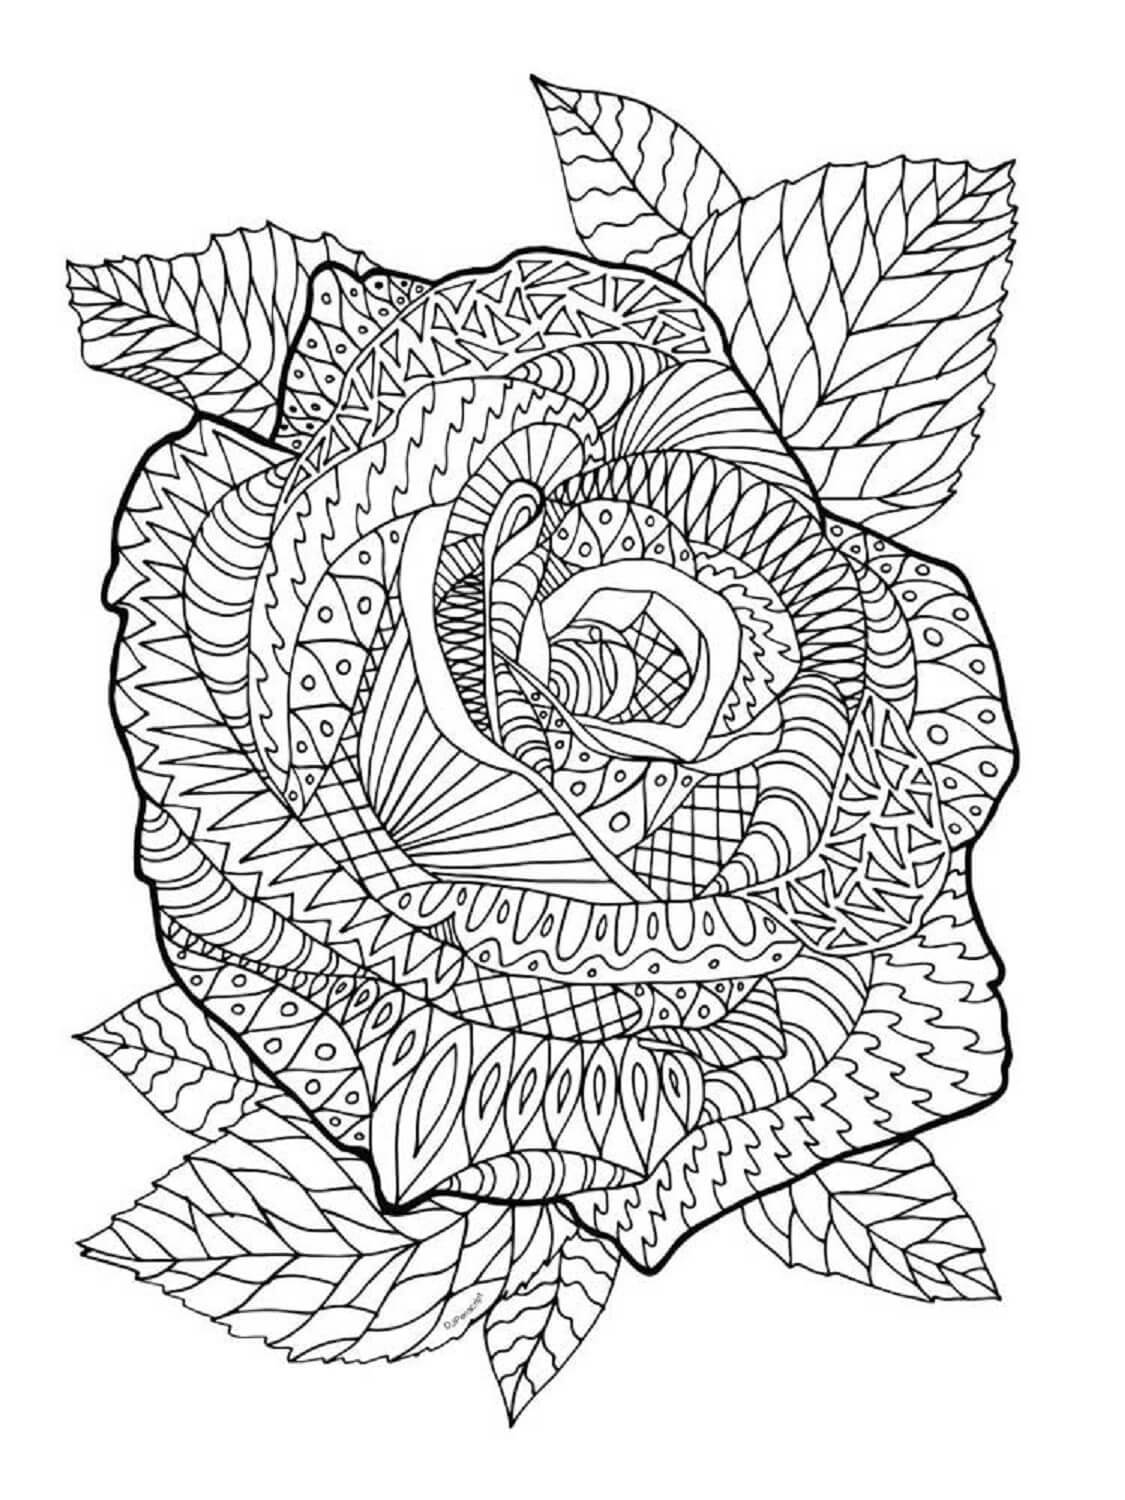 Zentangle rose coloring page